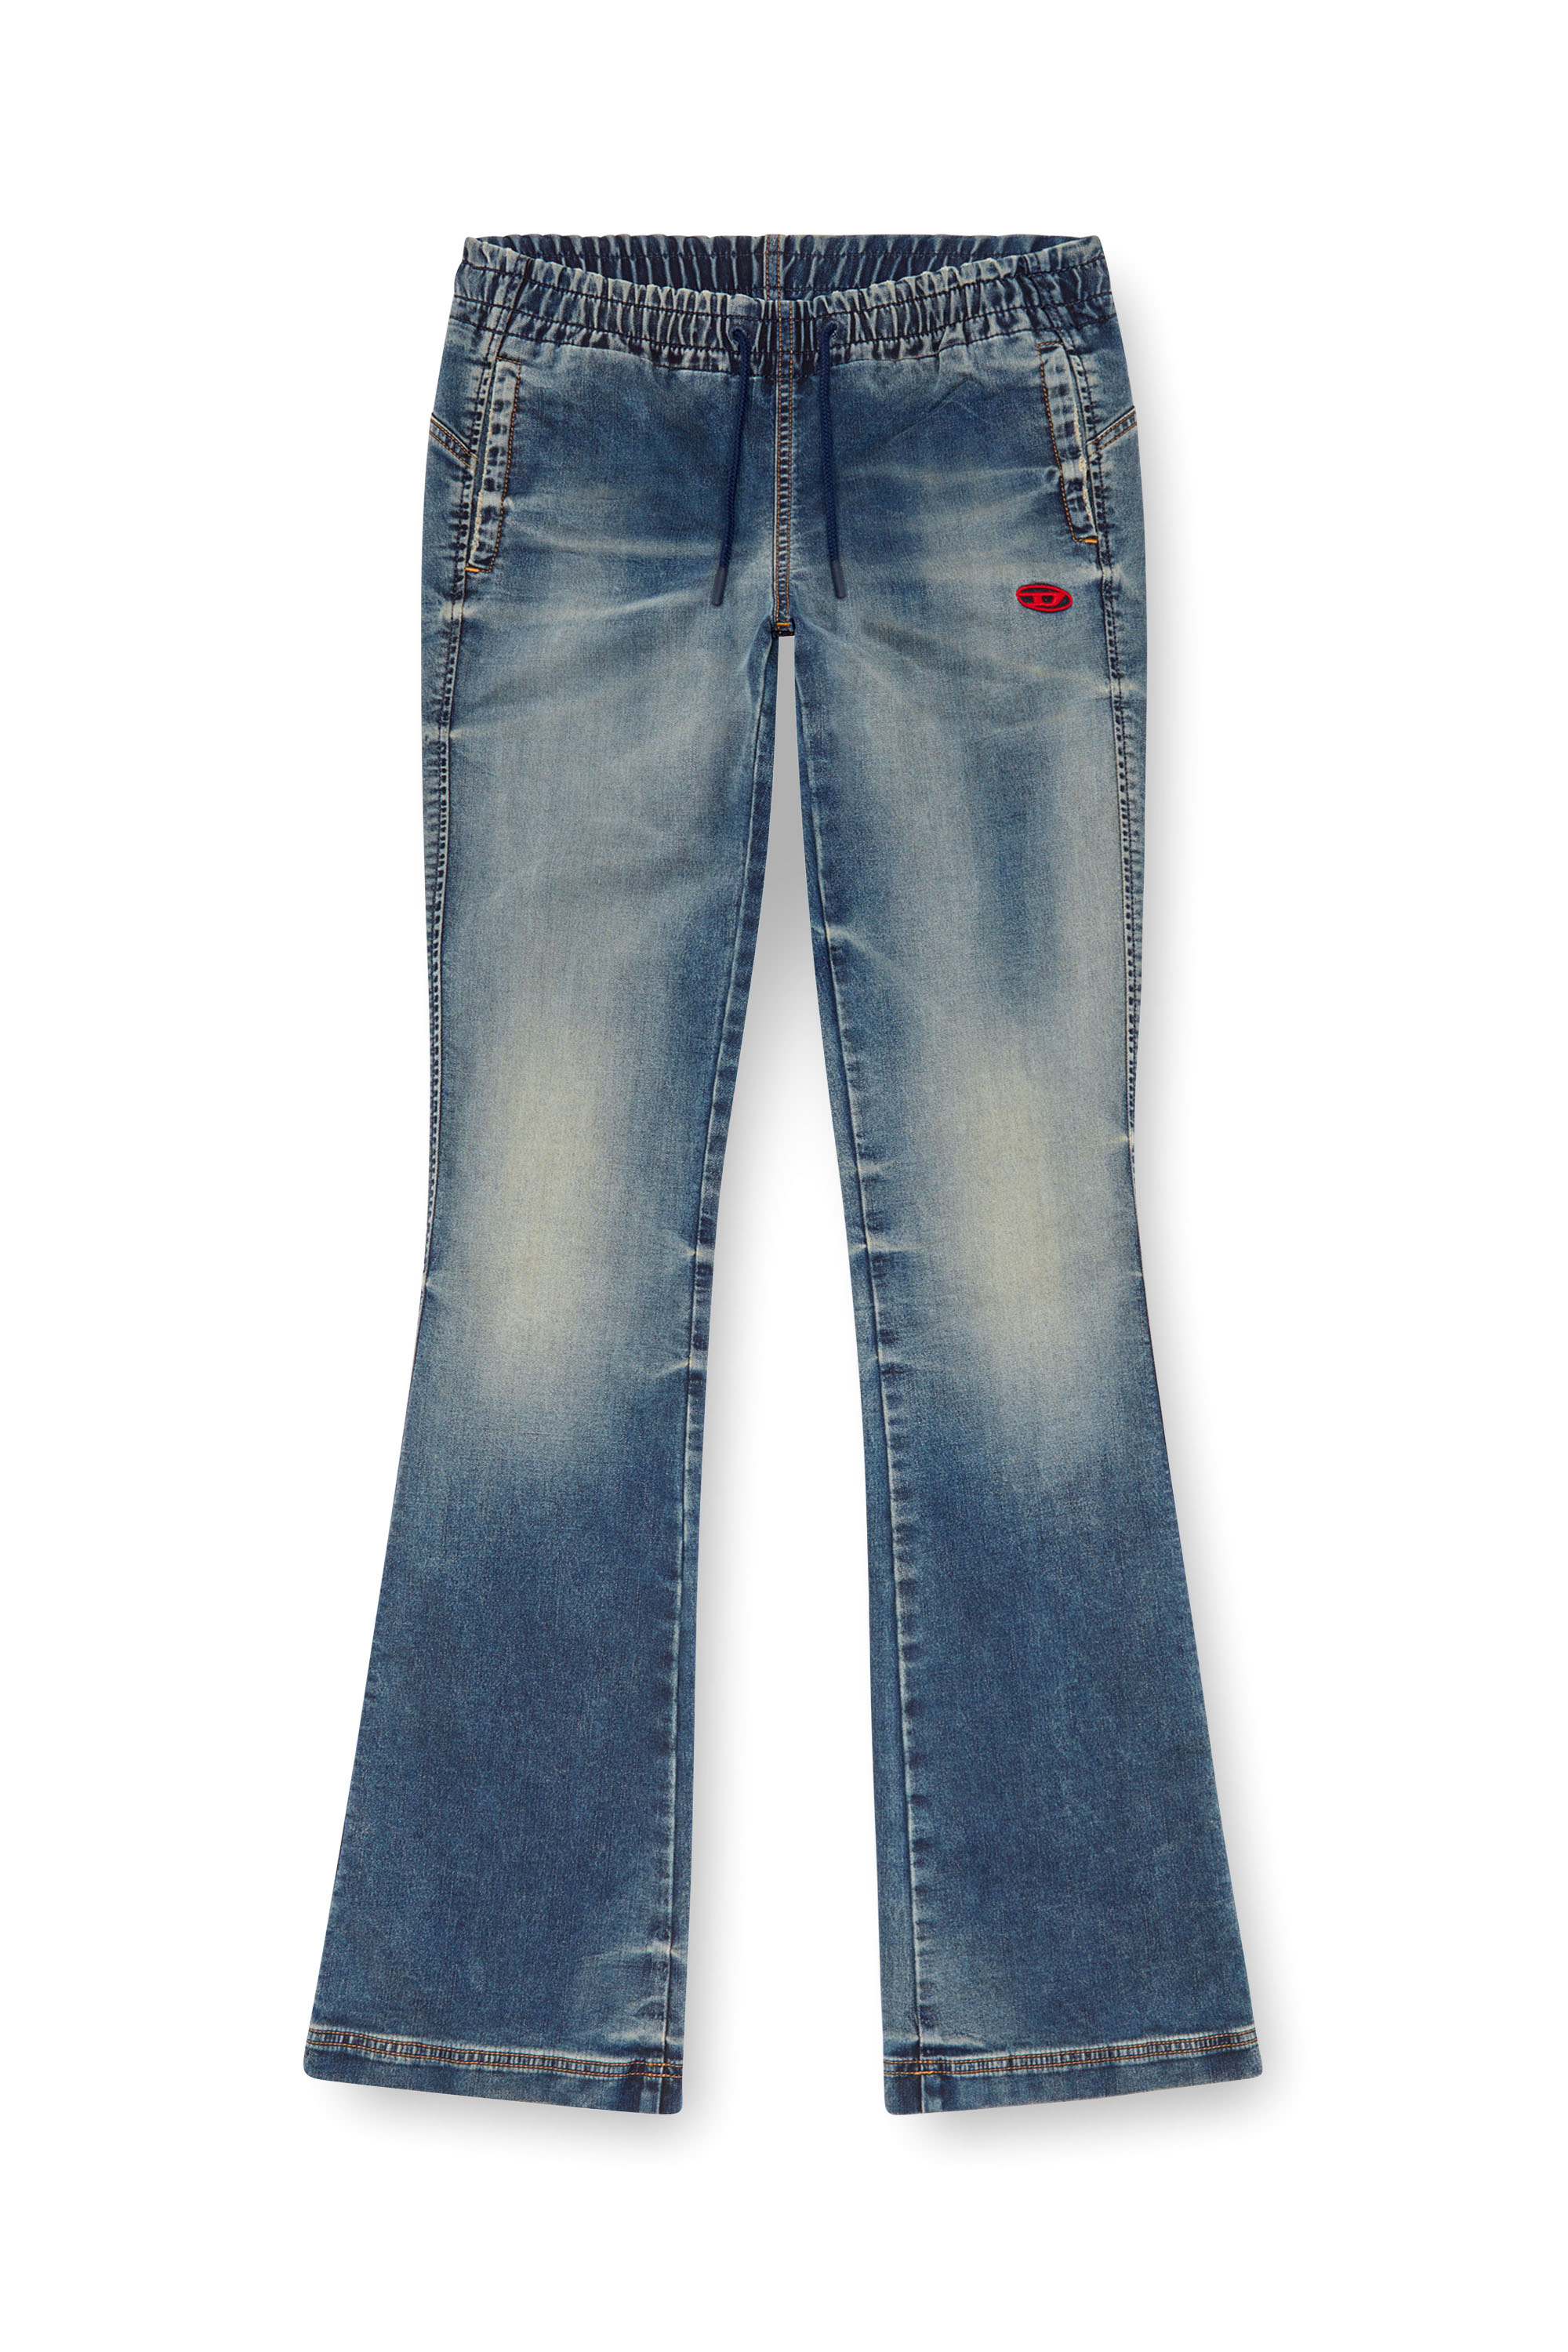 Diesel - Bootcut and Flare 2069 D-Ebbey Joggjeans® 068LZ, Mujer Bootcut y Flare 2069 D-Ebbey Joggjeans® in Azul marino - Image 5